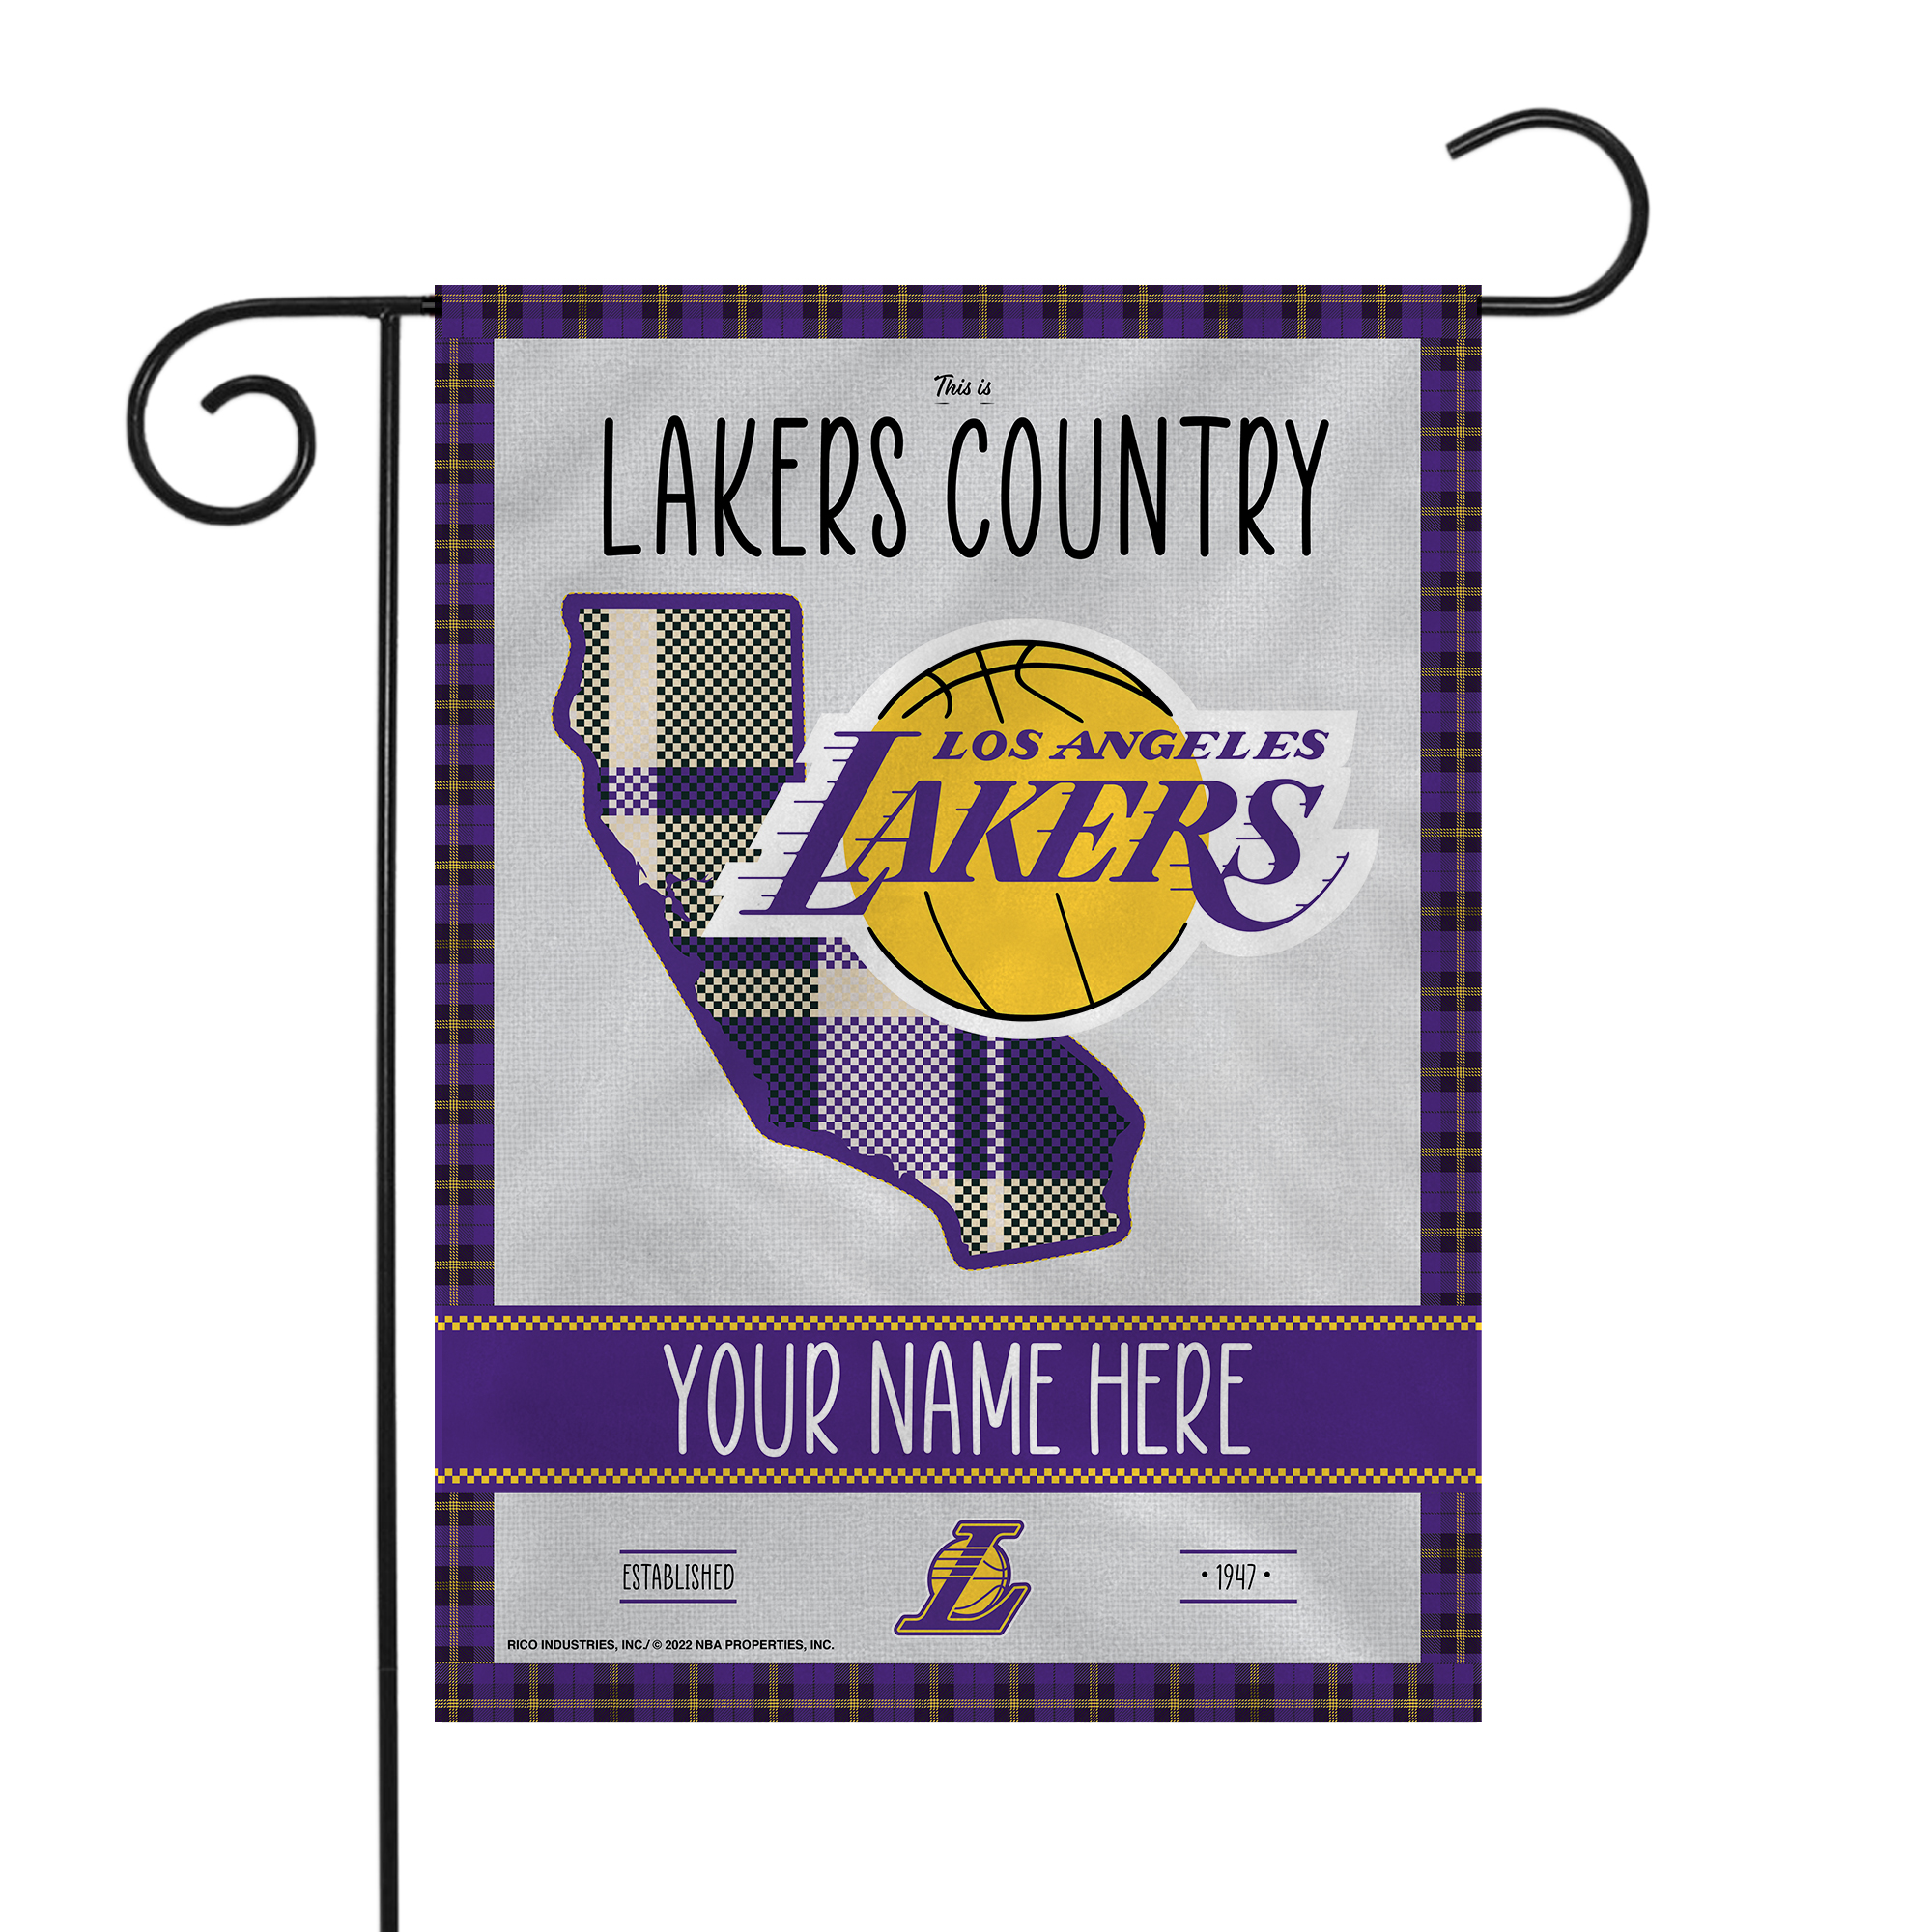 Rico Industries NBA Basketball Los Angeles Lakers This is Lakers Country - Plaid Design Personalized Garden Flag